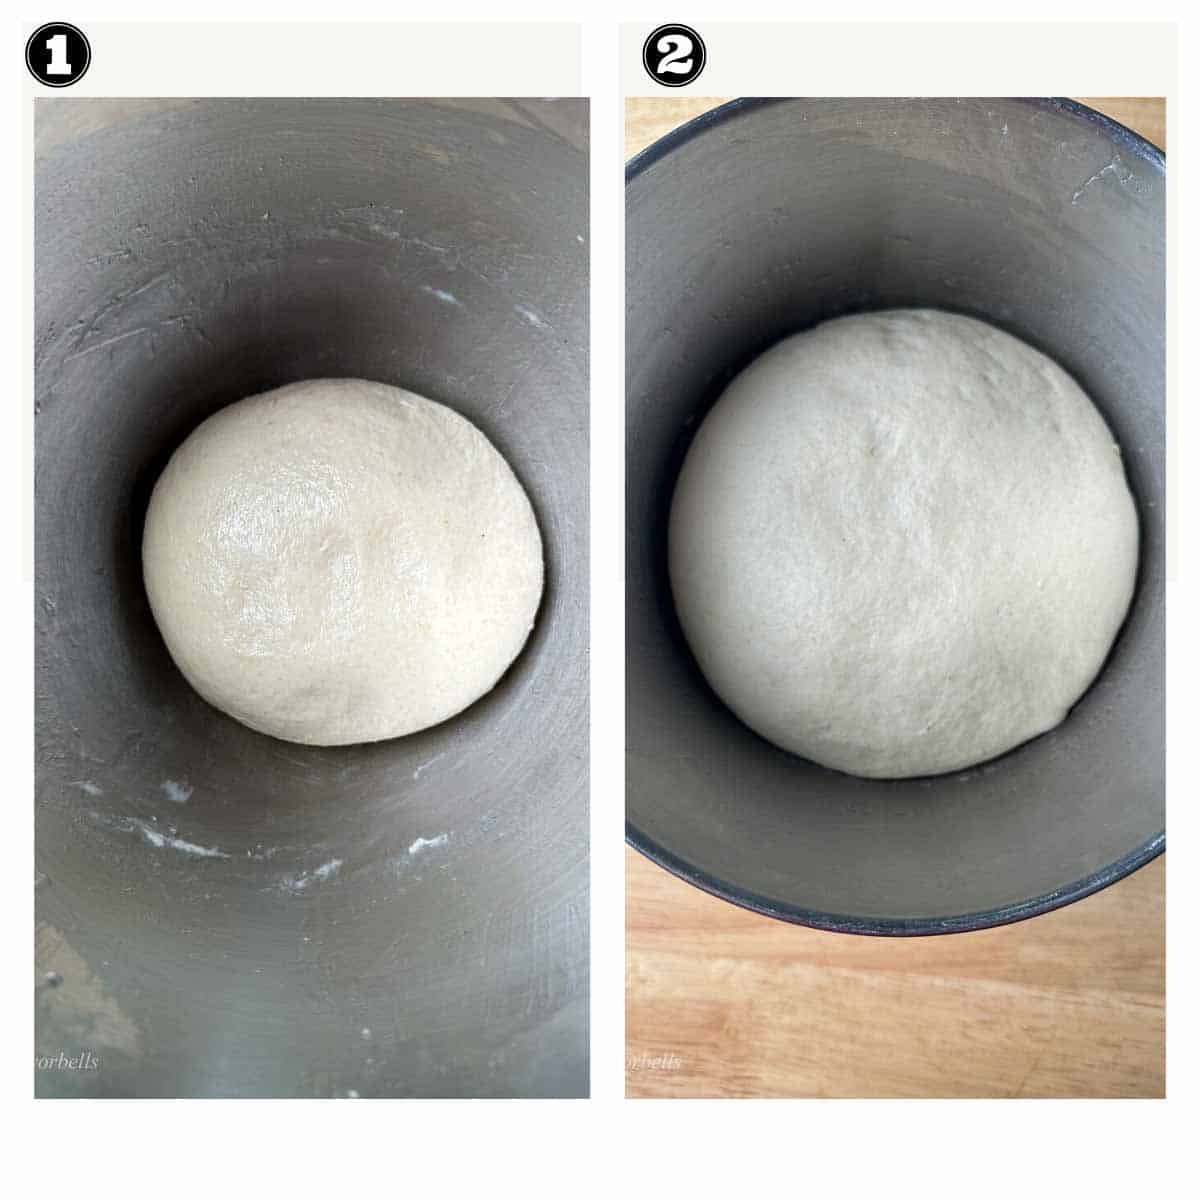 image showing dough before and after the completion of the bulk fermentation